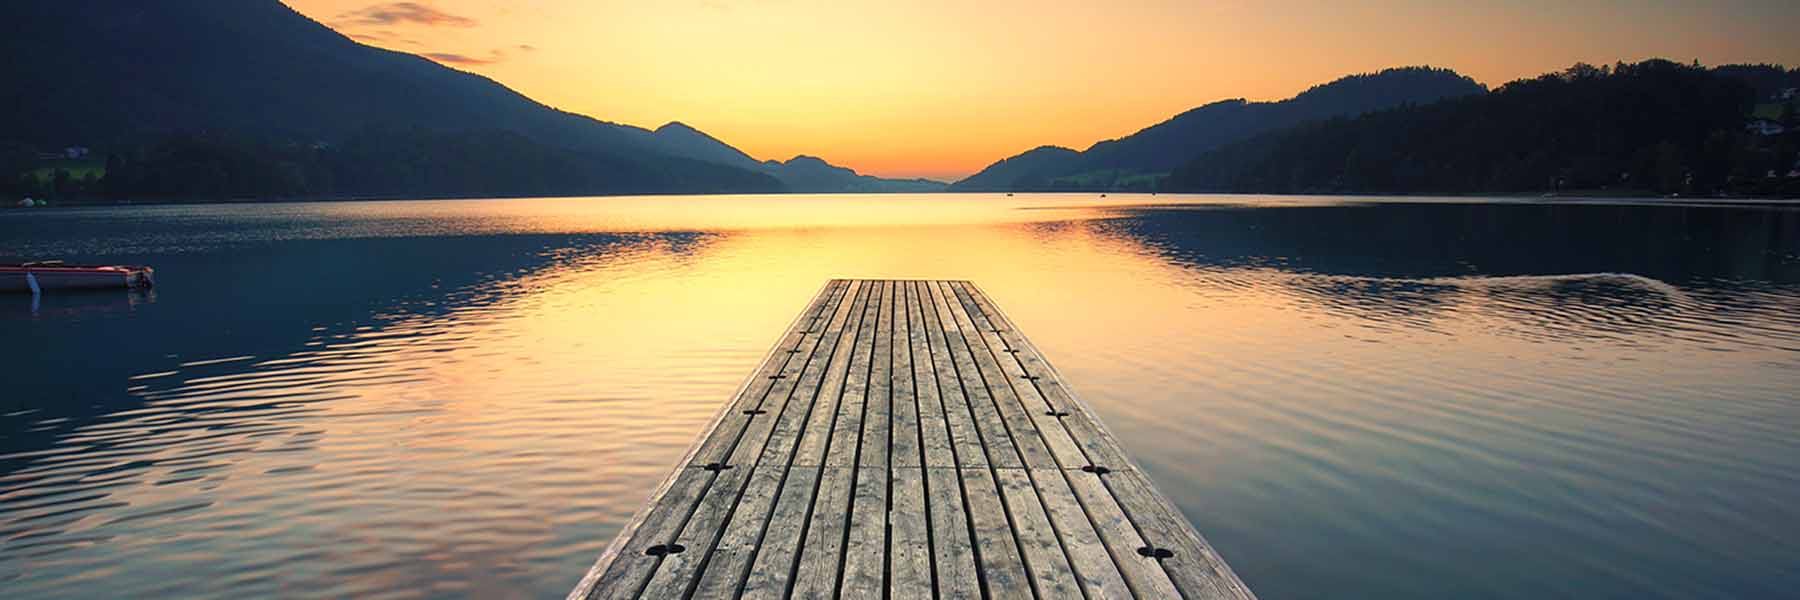 A lonely wooden pier out into a still lake at sunset